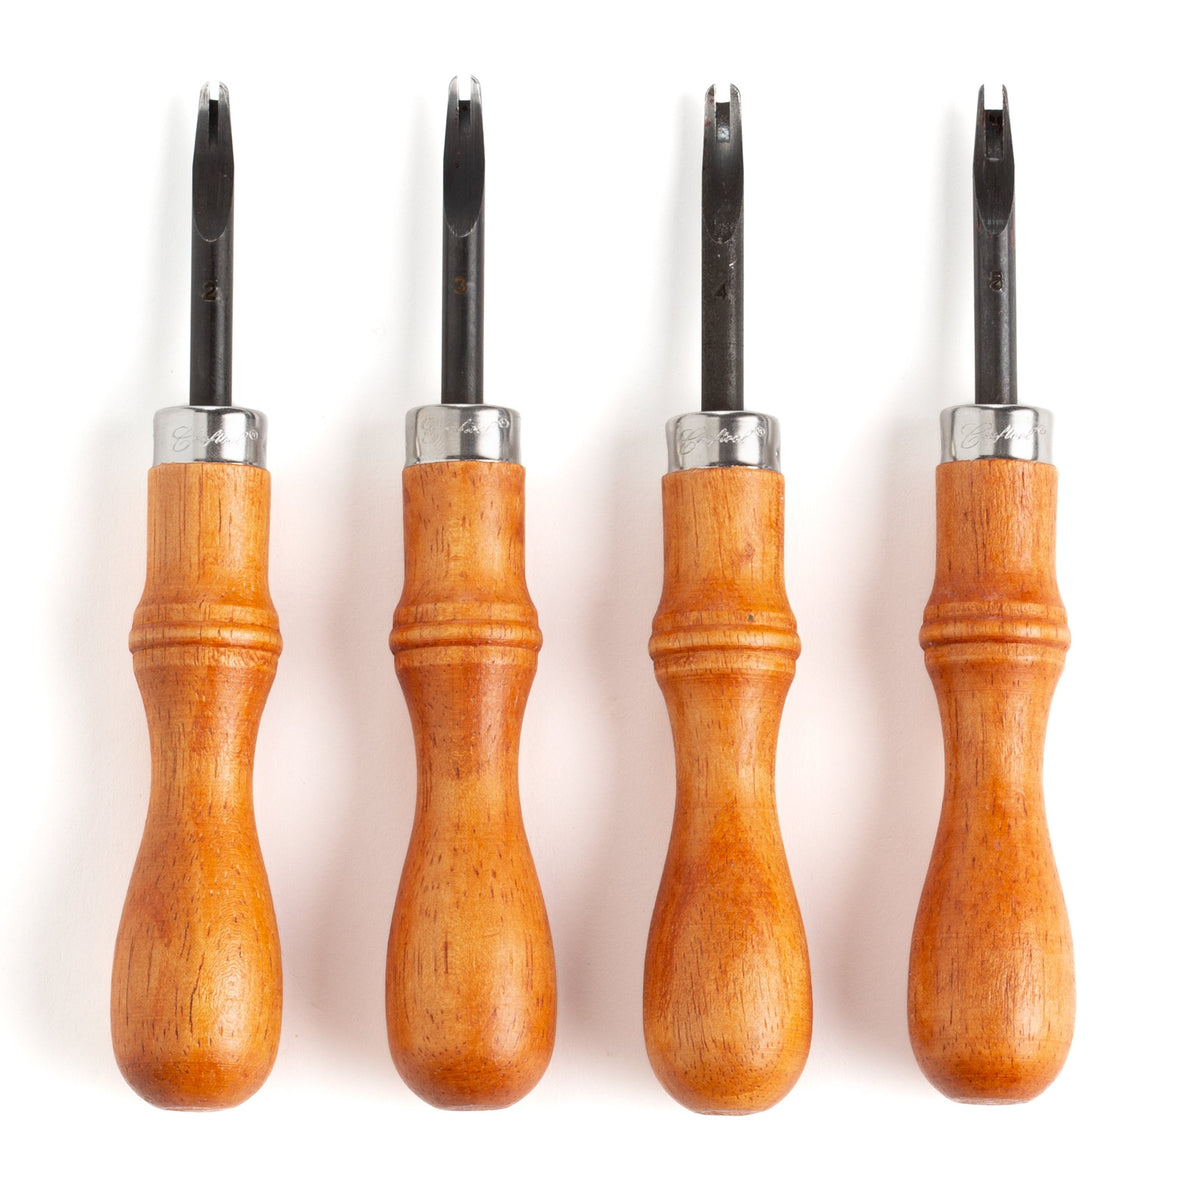 Tandy-Leather Tools South Africa, Buy Tandy-Leather Tools Online